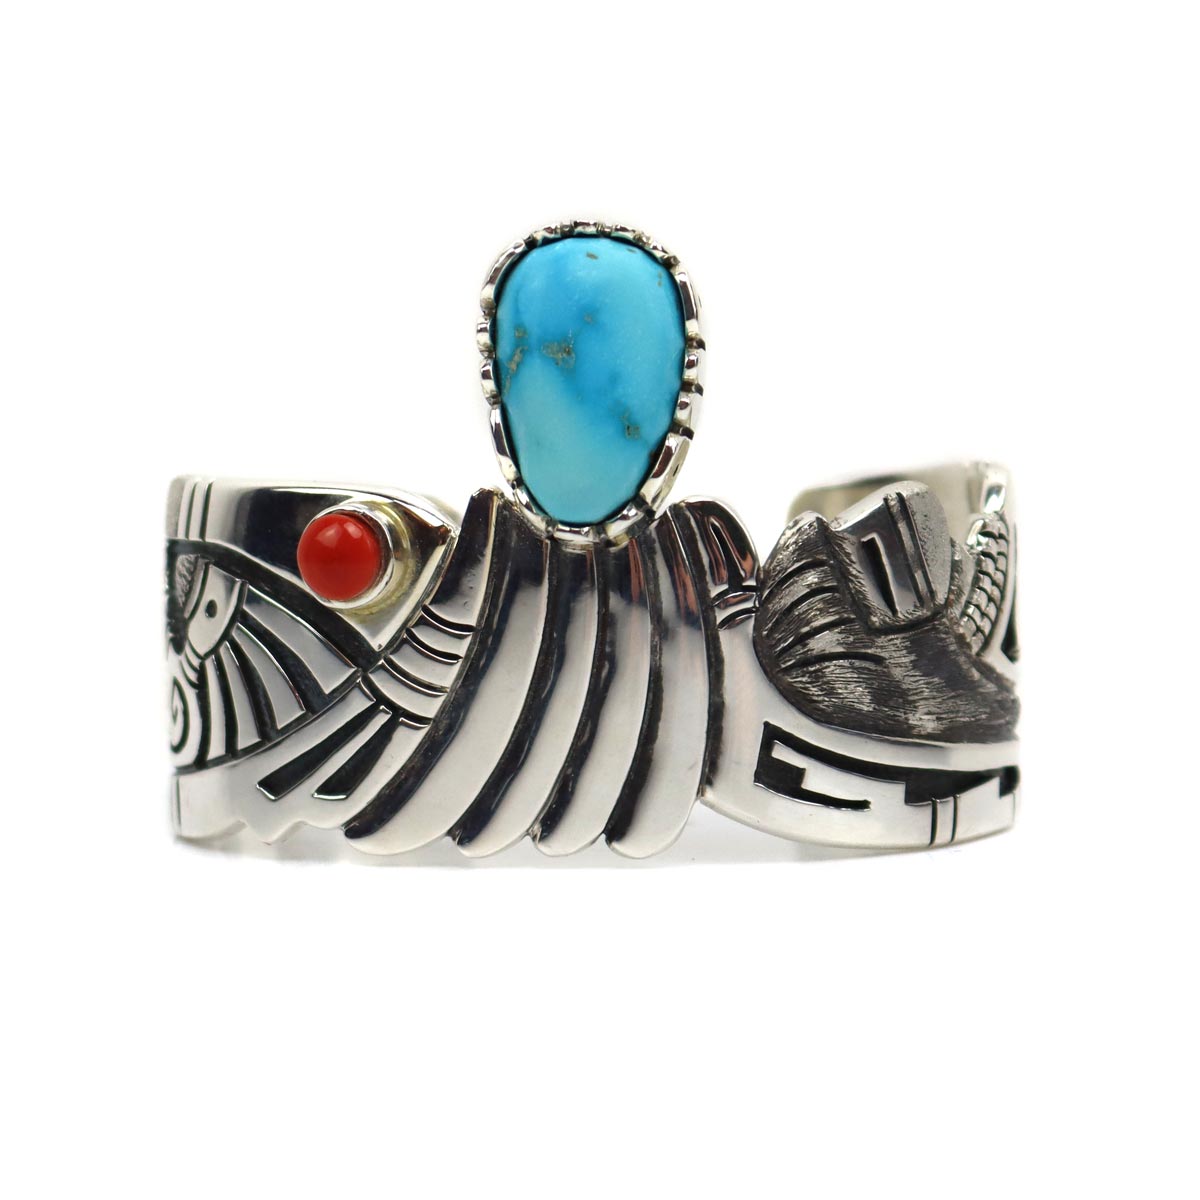 
Roy Talahaftewa - Hopi Contemporary Morenci Turquoise, Coral, and Sterling Silver Overlay Bracelet, size 6.75 (J15270)